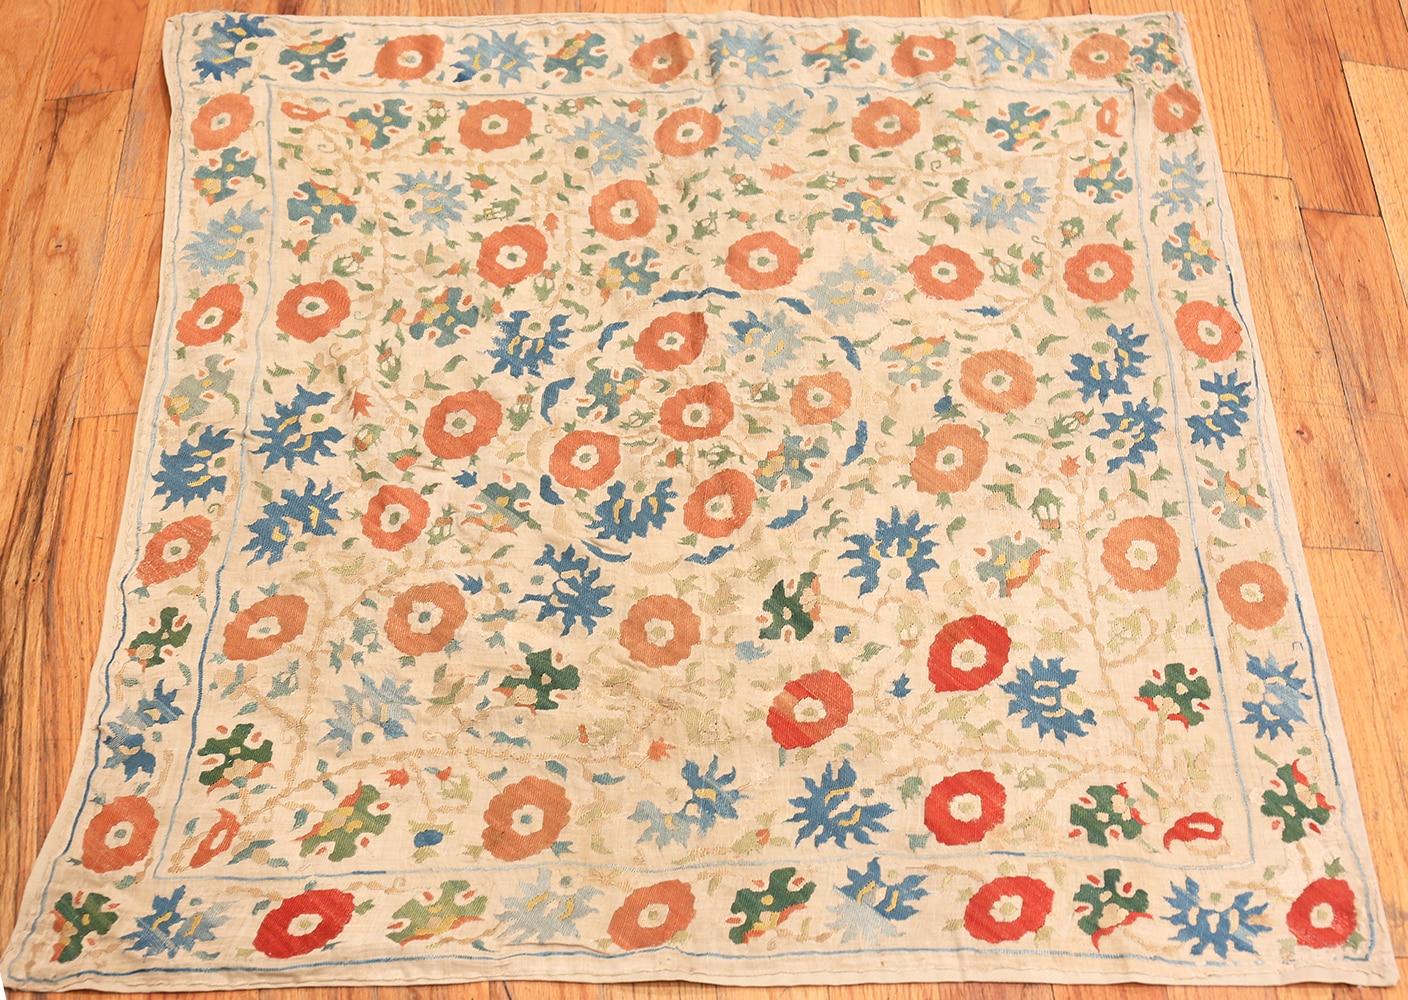 Beautiful Antique 18th Century Ottoman Embroidery Textile 3'10